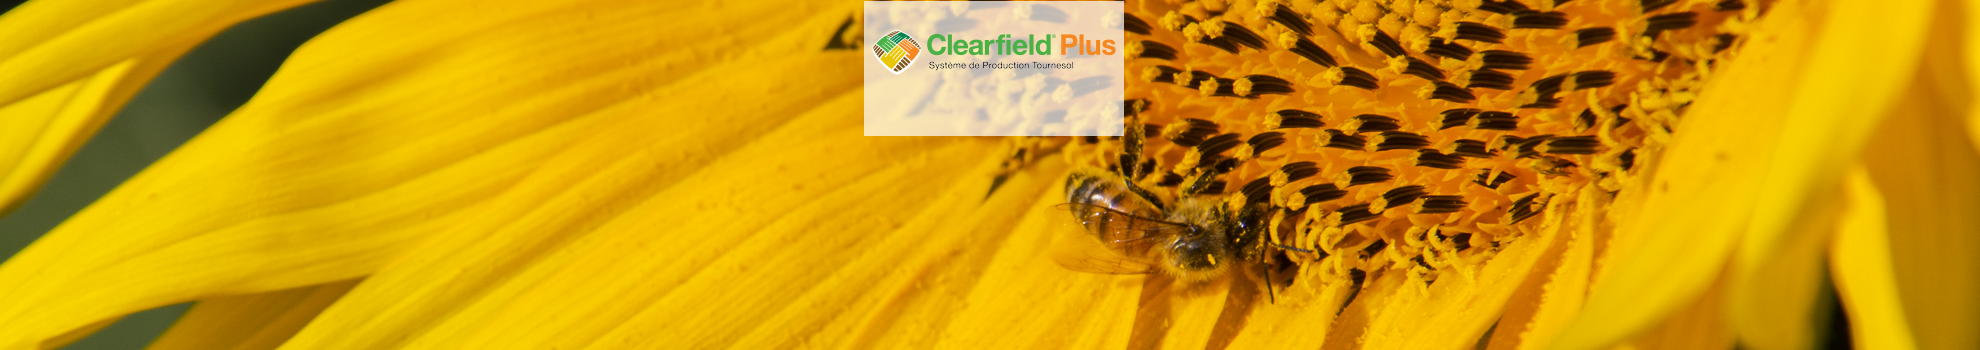 CLEARFIELD PLUS®